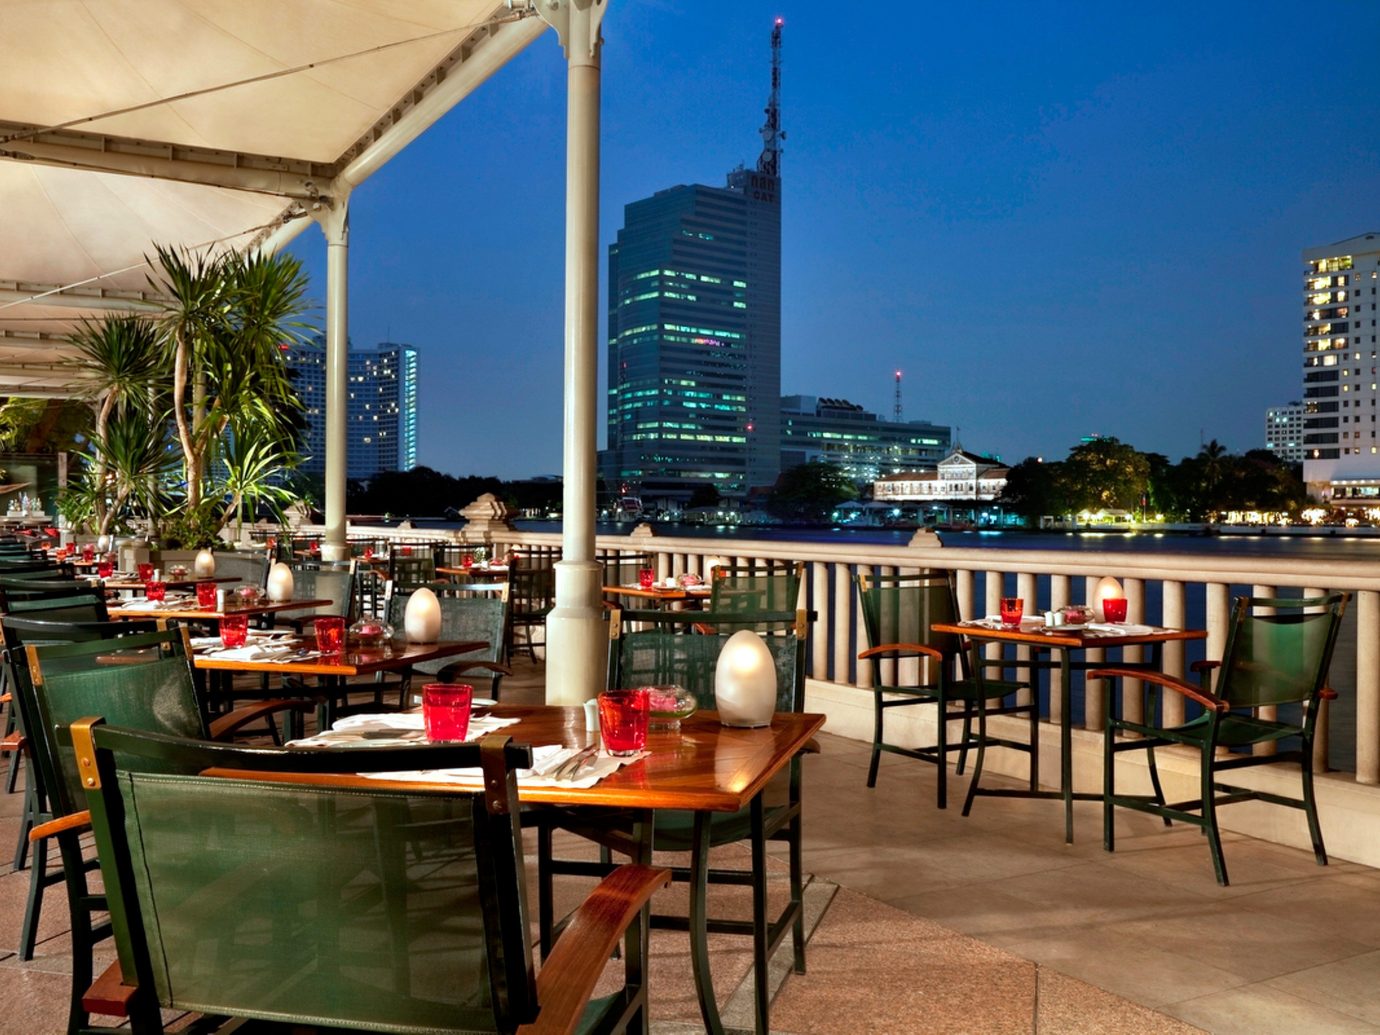 City Dining Drink Eat Hotels Patio Terrace Waterfront sky table chair outdoor restaurant plaza condominium Resort area